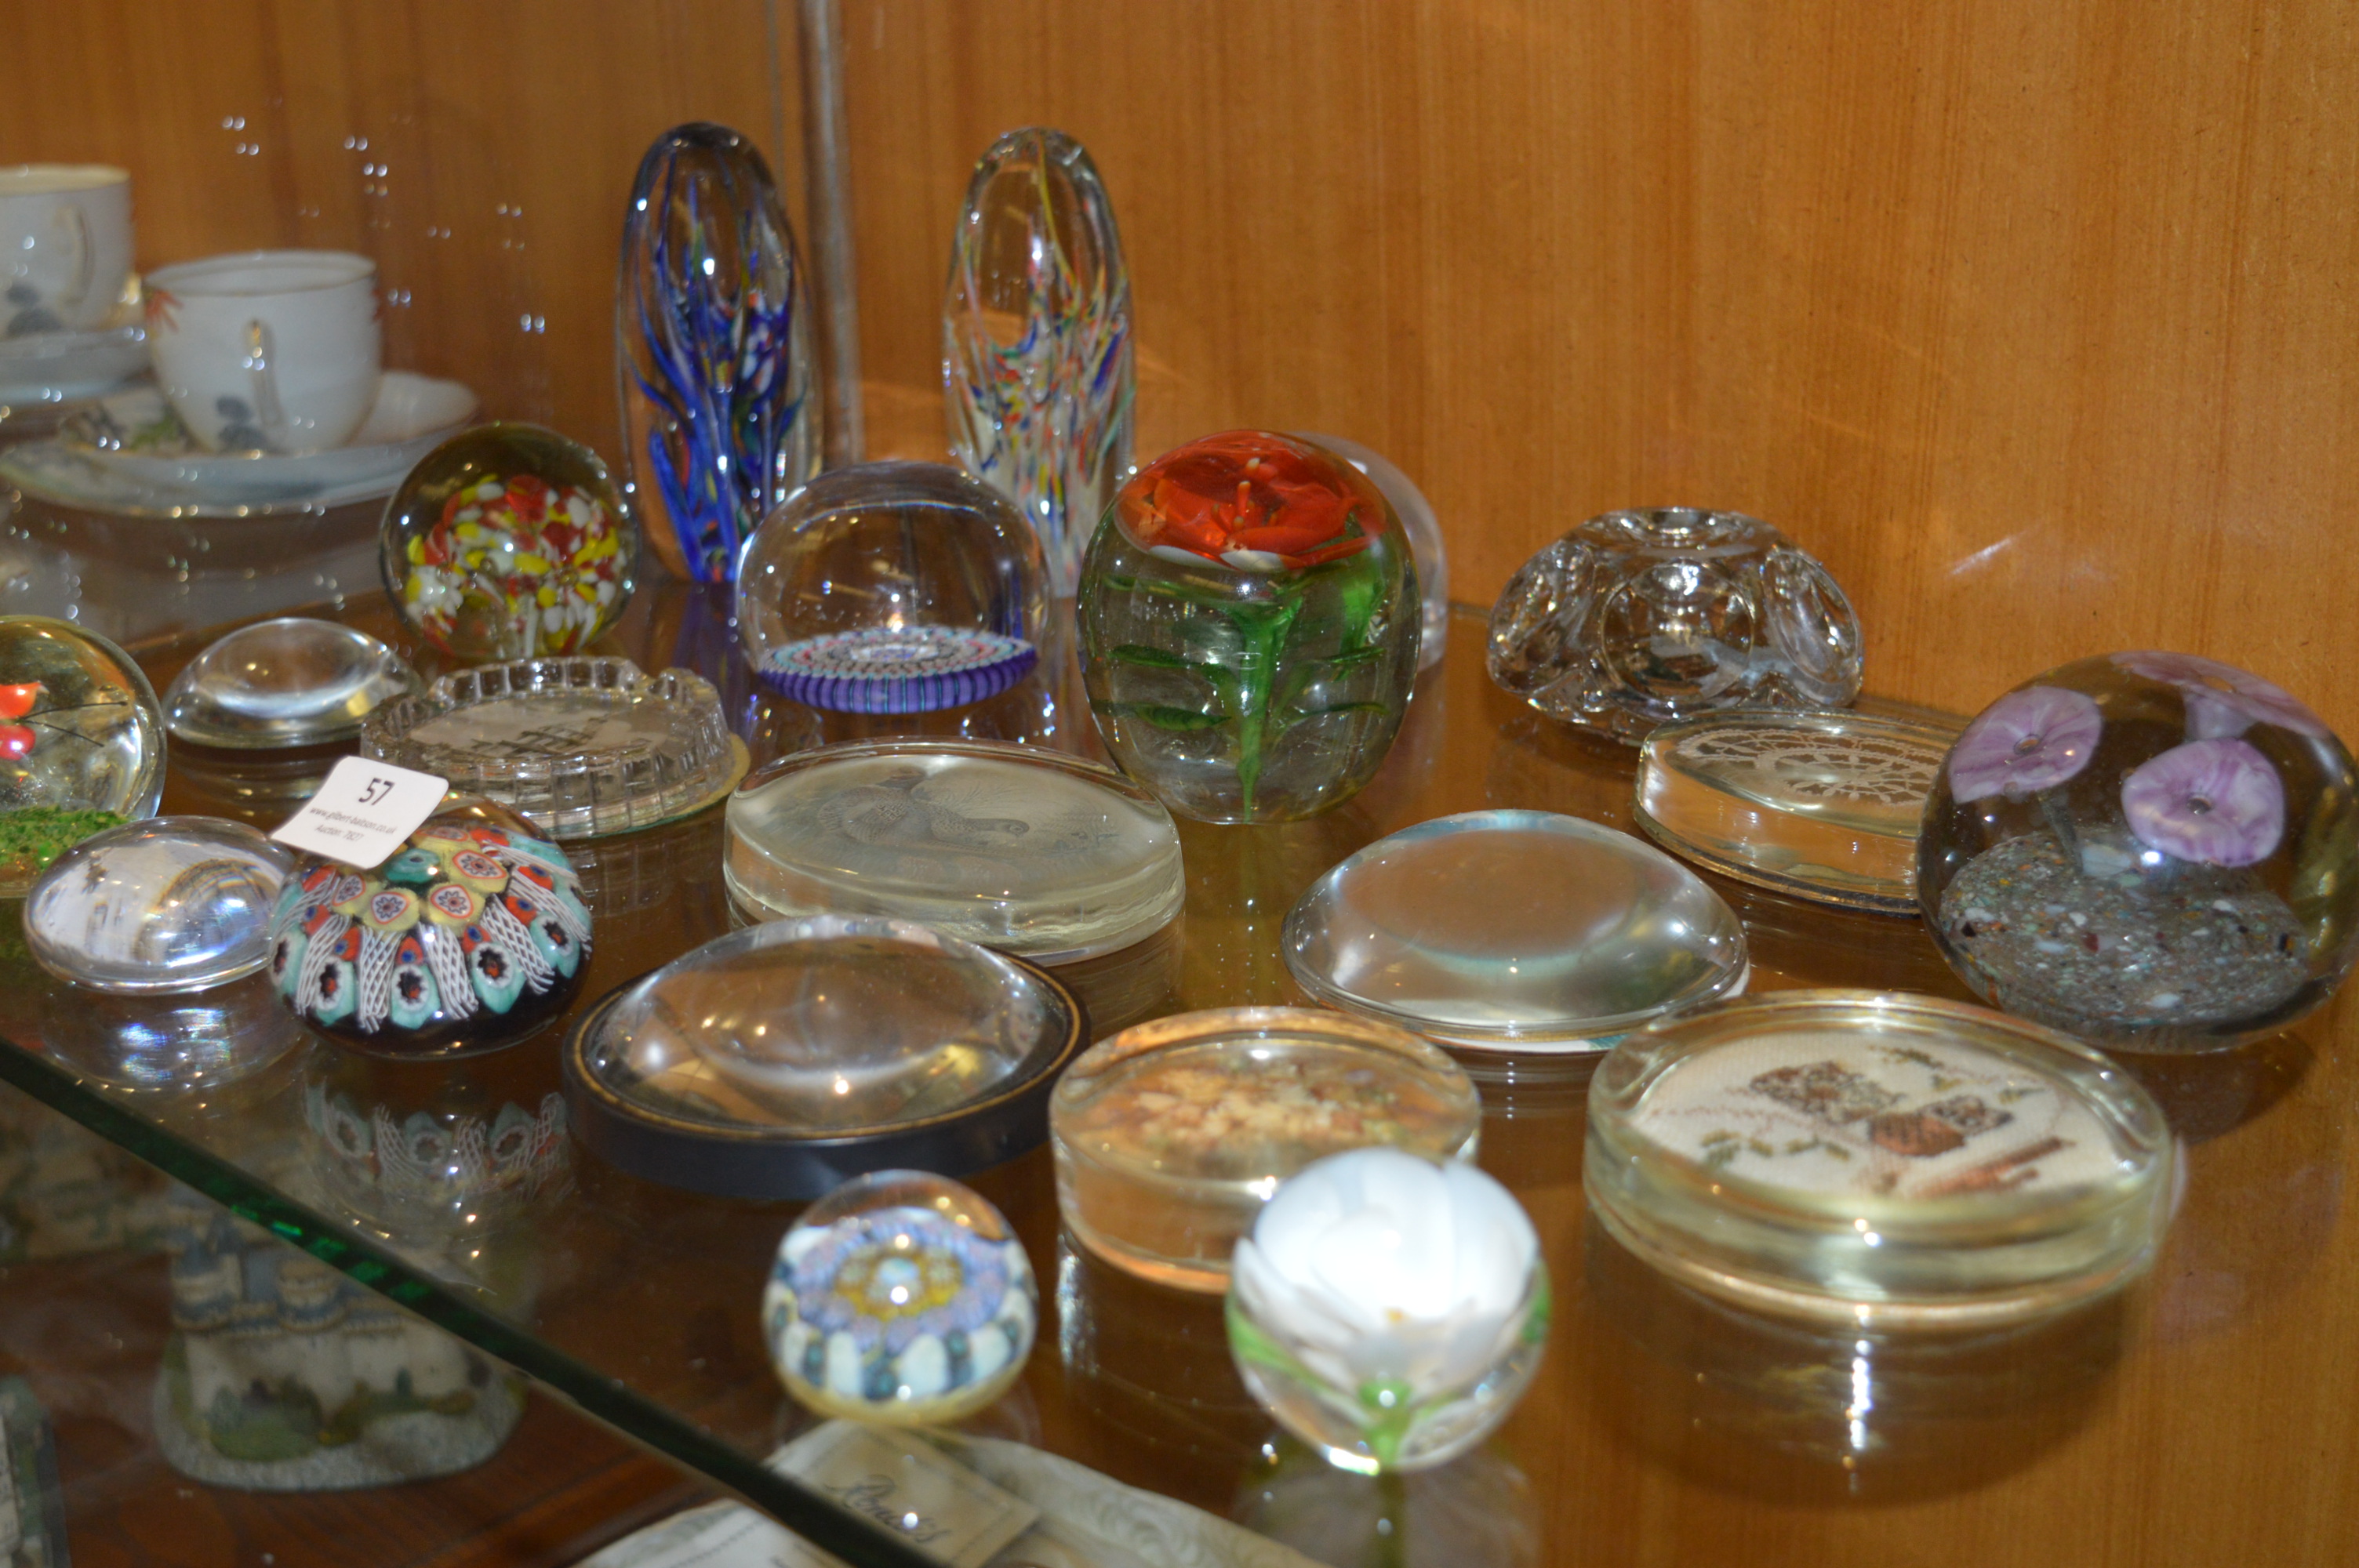 Collection of Glass Paperweights